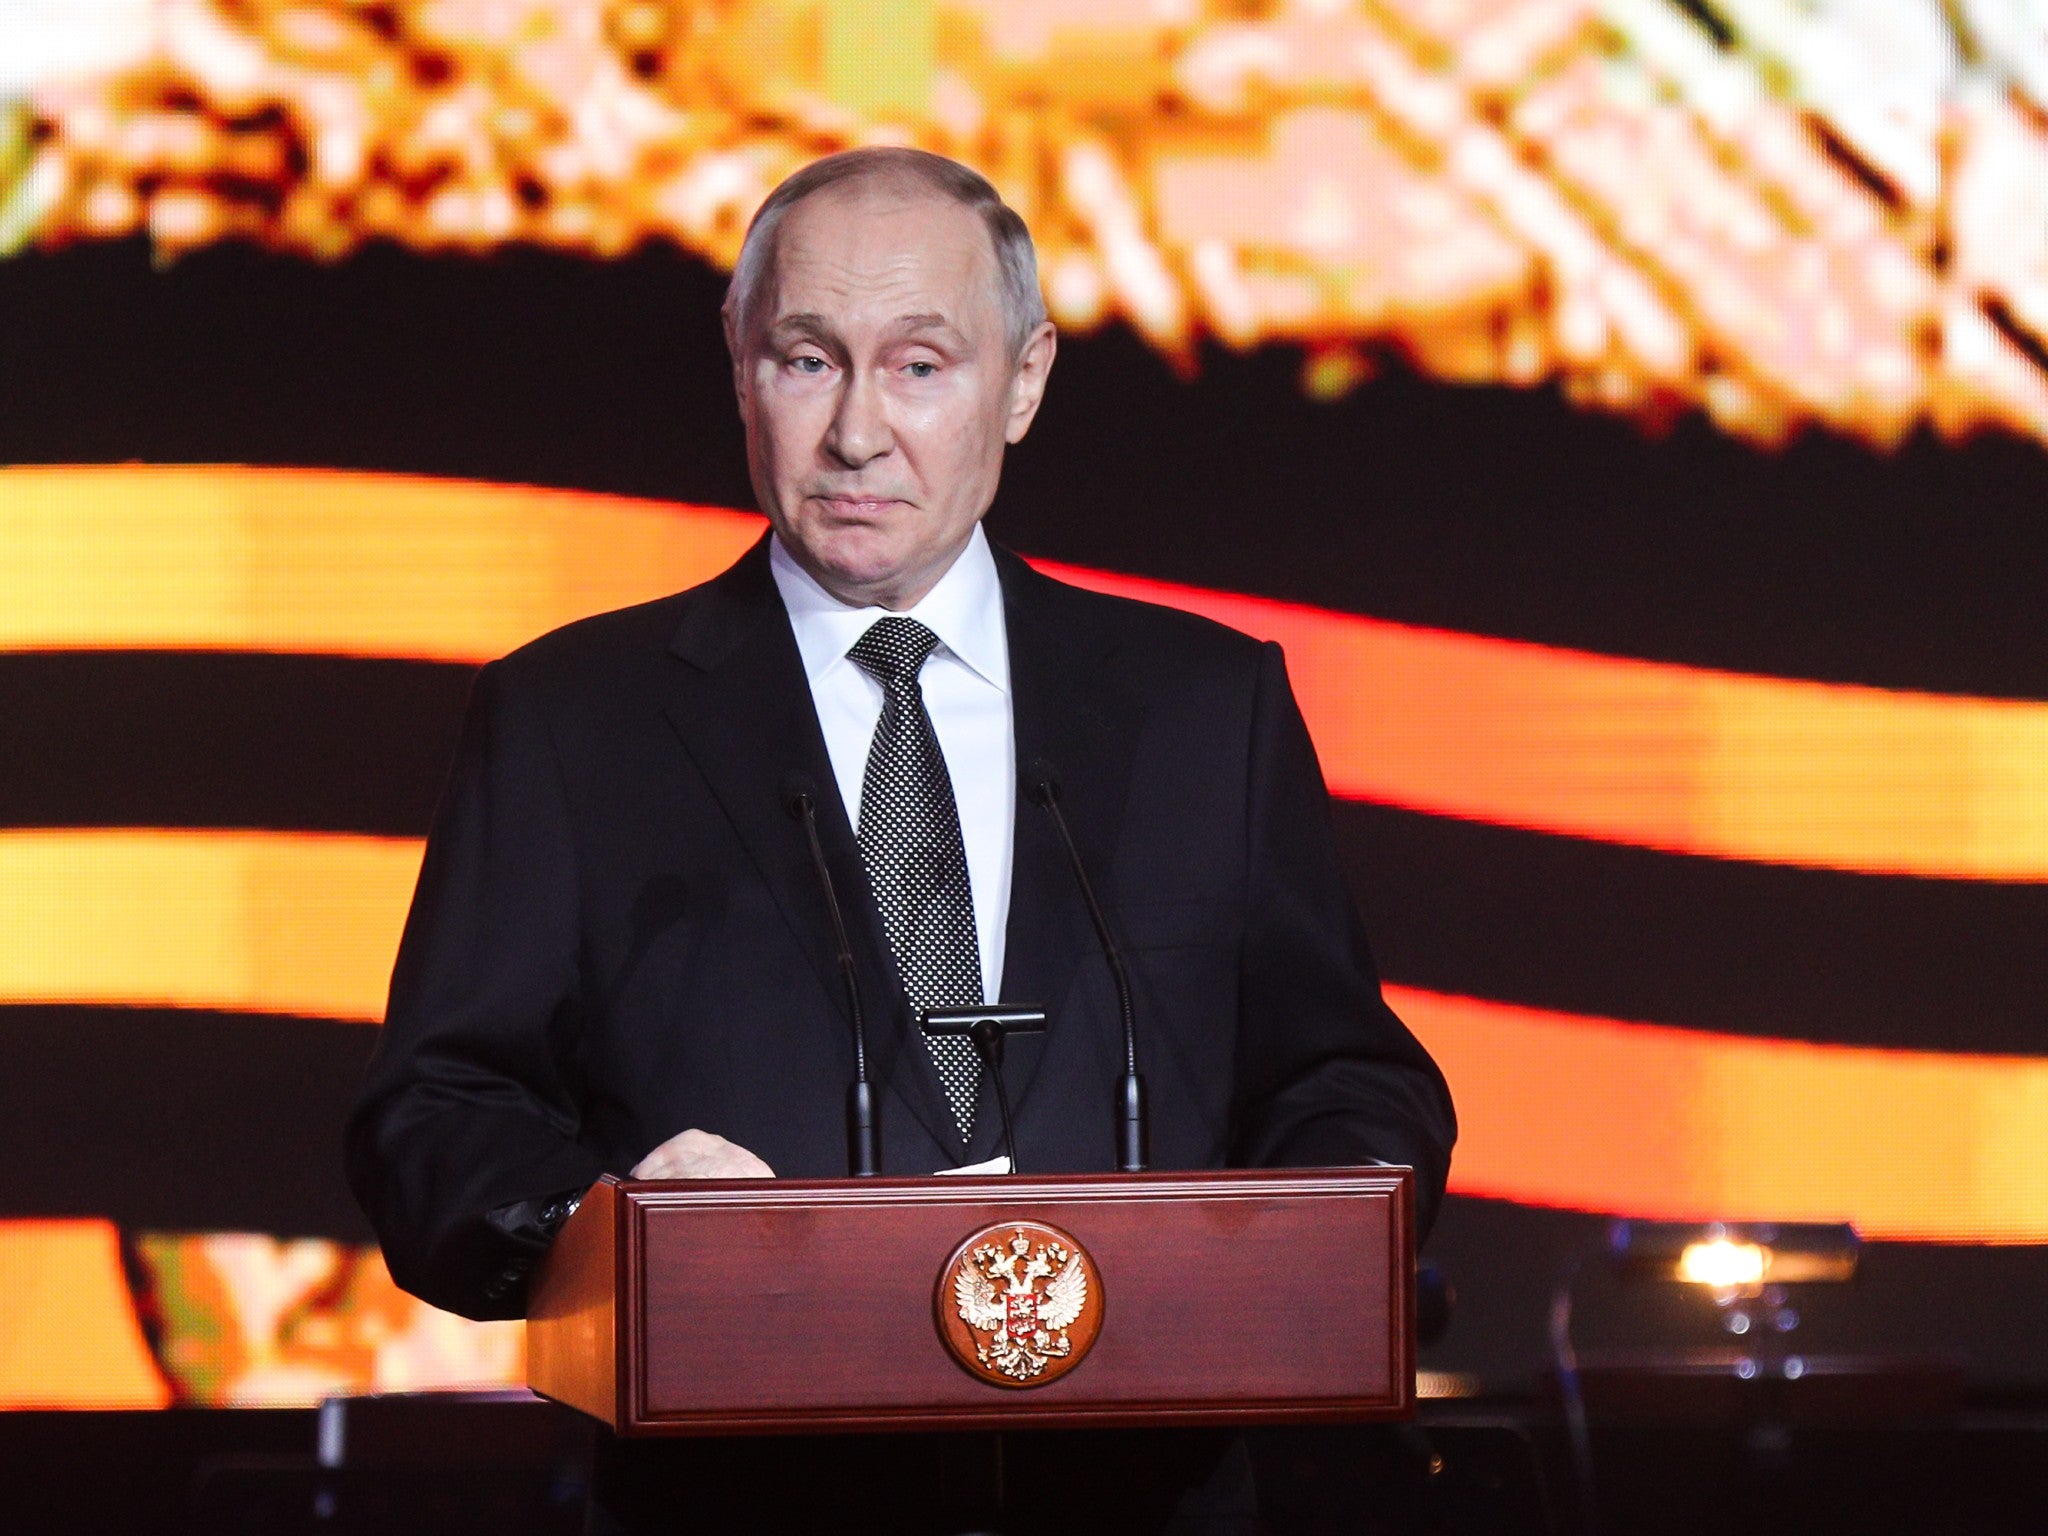 Vladimir Putin delivers his speech in the southern Russian city of Volgograd